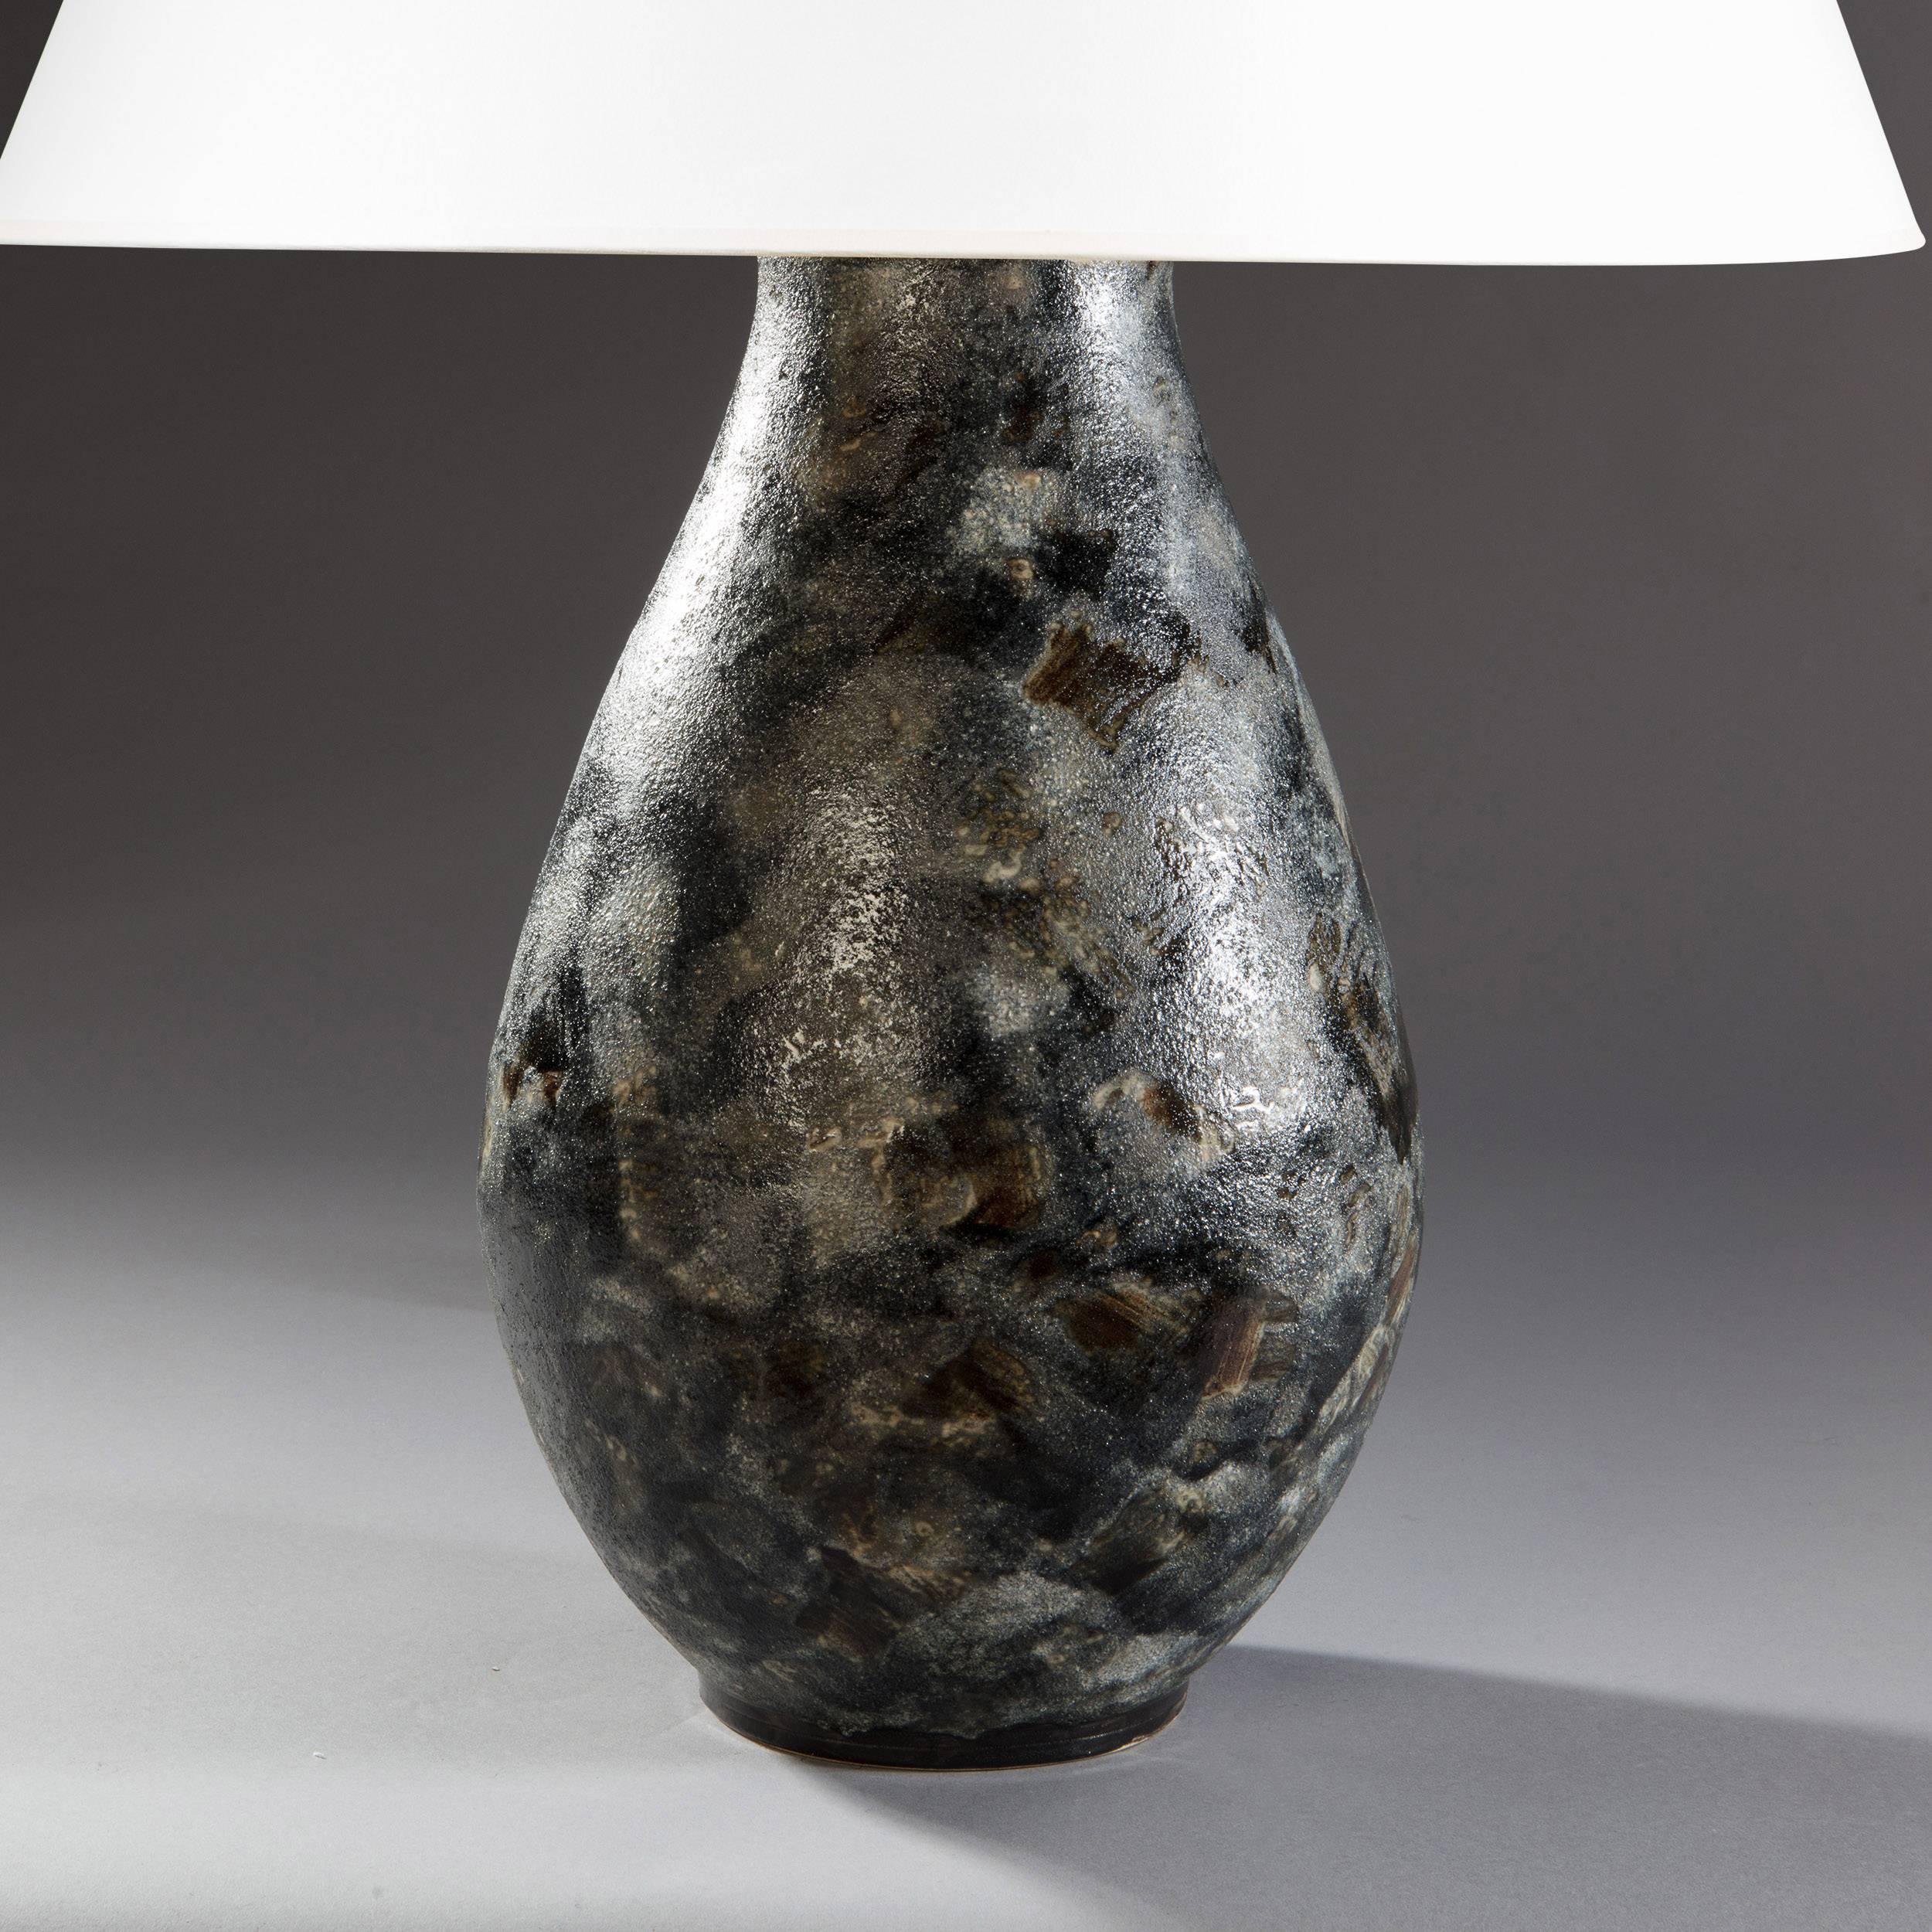 A pair of 20th century art pottery vases with textured grey glaze, now as lamps.